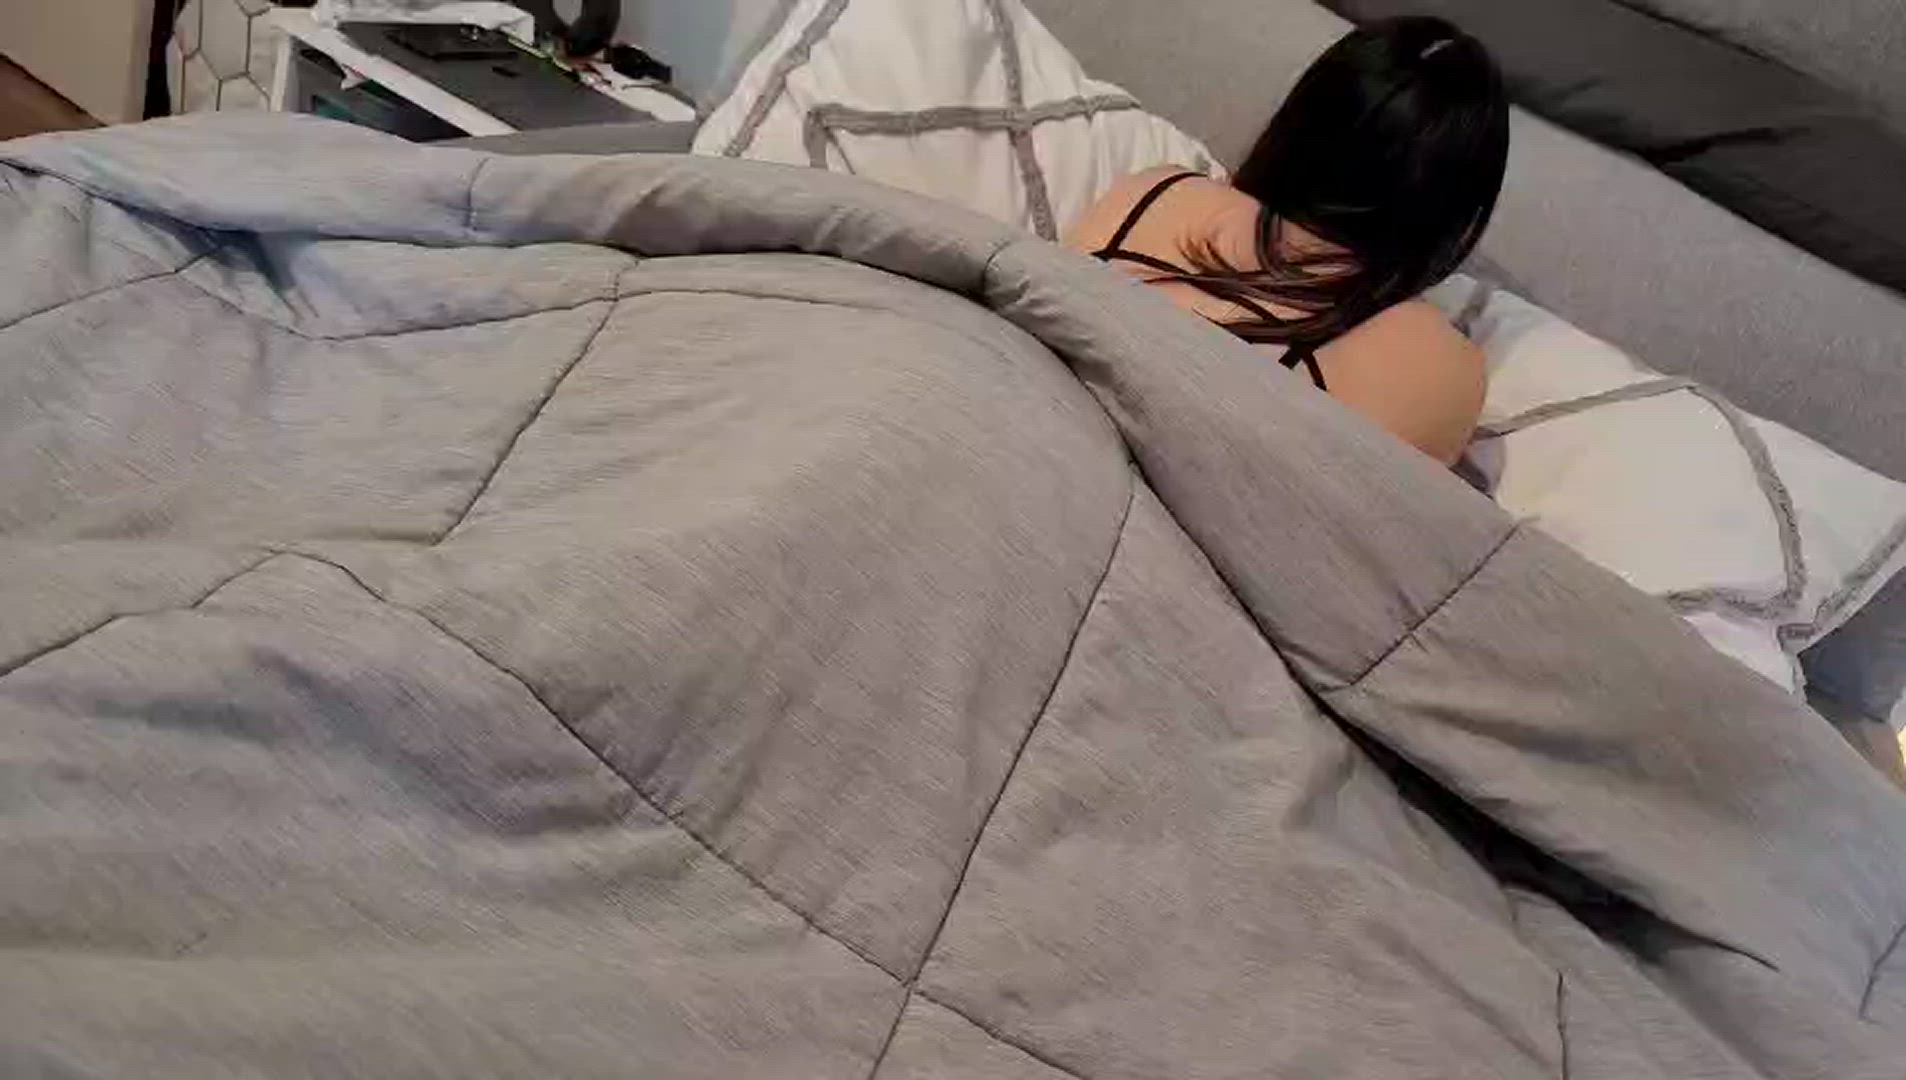 Ass porn video with onlyfans model Swinger4us <strong>@lileevee02</strong>